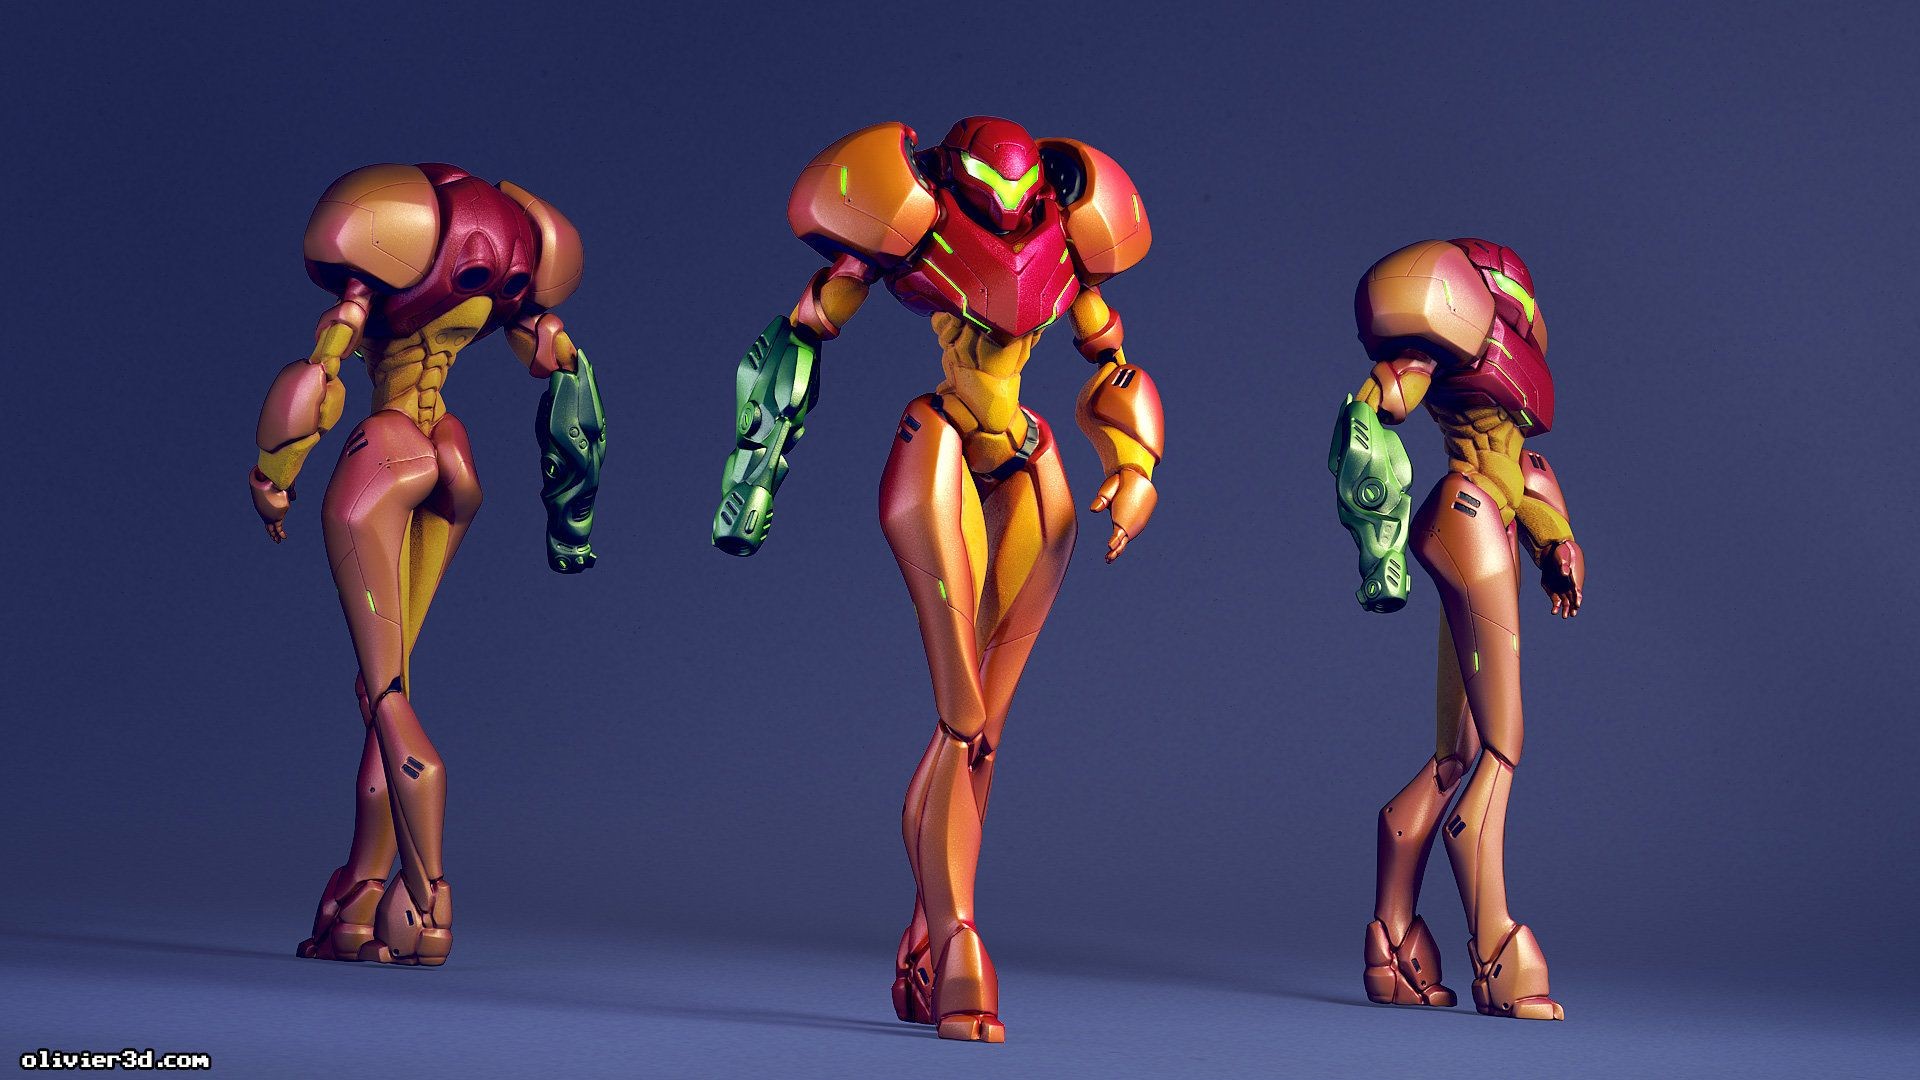 Metroid Papercraft My Re Design Of the Famous Character From the Metroid Game Samus